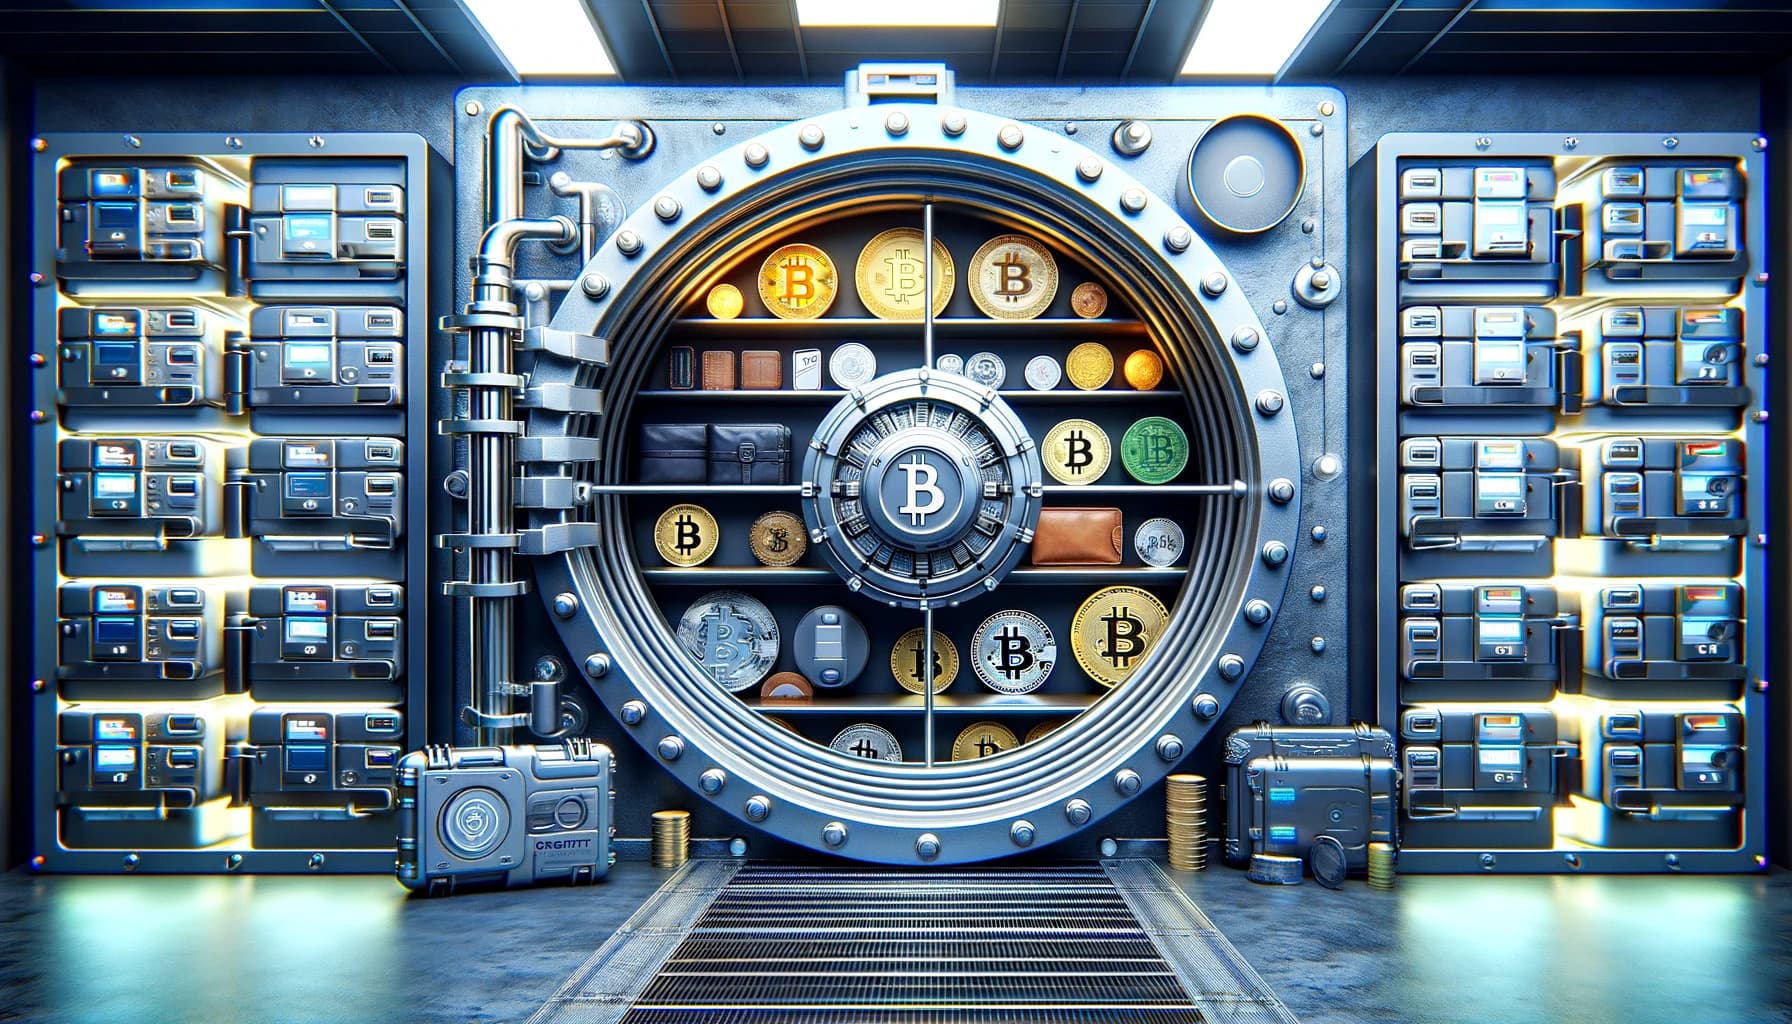 Bucket Technologies image showing Bitcoin symbols on a shelf within a clear bank vault looking fixture.